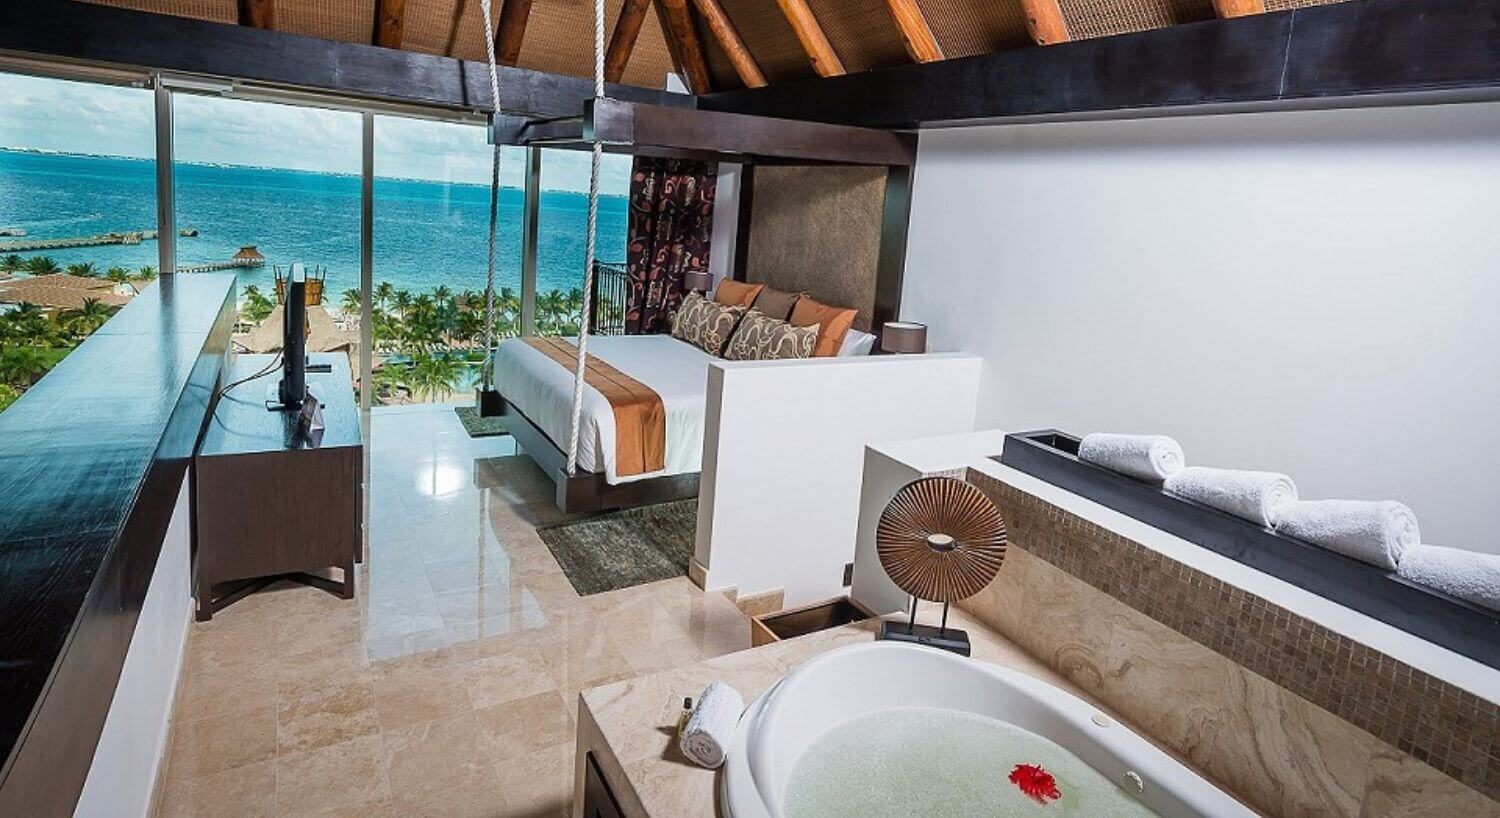 A bedroom with a seemingly hanging king bed with white, orange and brown bedding, a dresser with flat screen TV on top, a jetted tub, and floor to ceiling windows with beautiful ocean views.